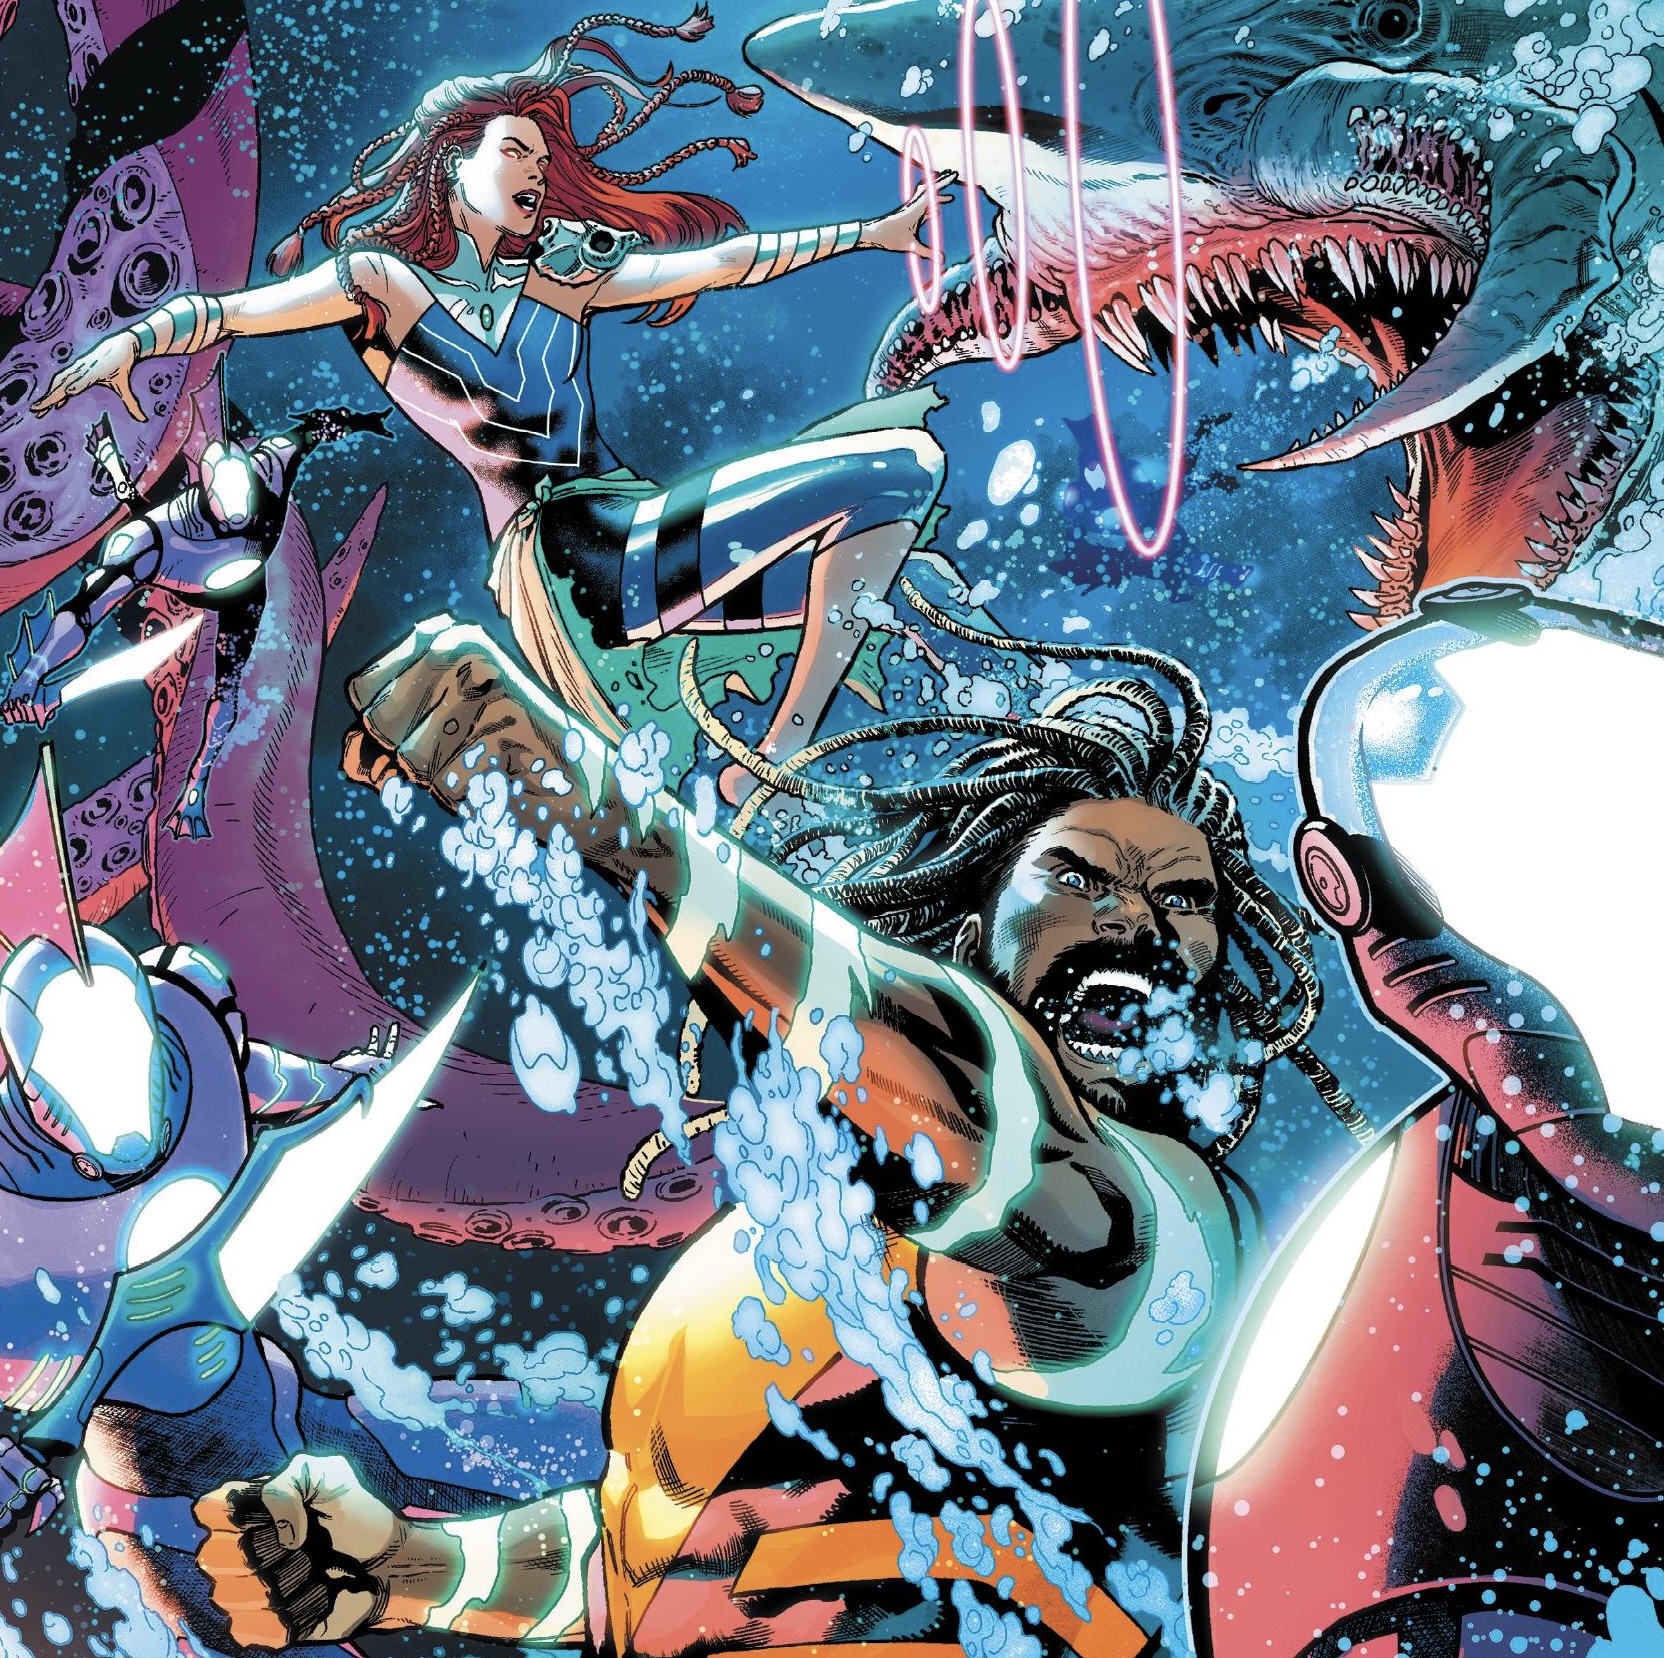 Future State: Aquaman #2 Cover, by Daniel Sampere and Adriano Lucas